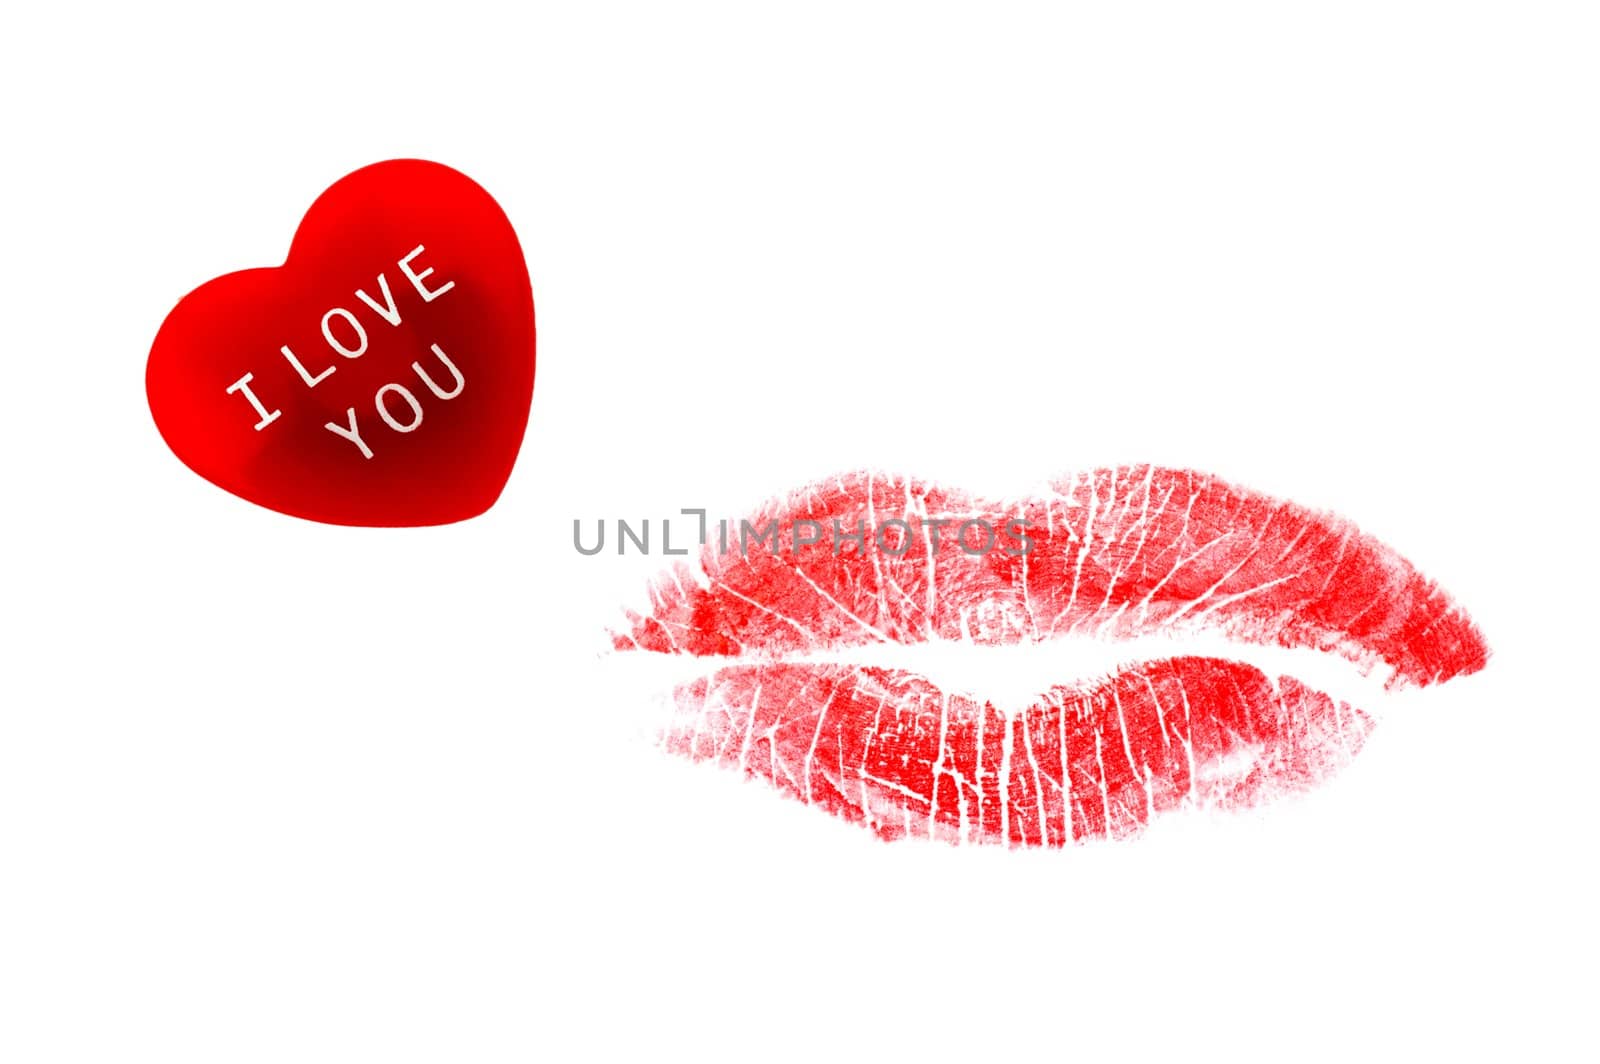 Heart and lipstick kiss by sil